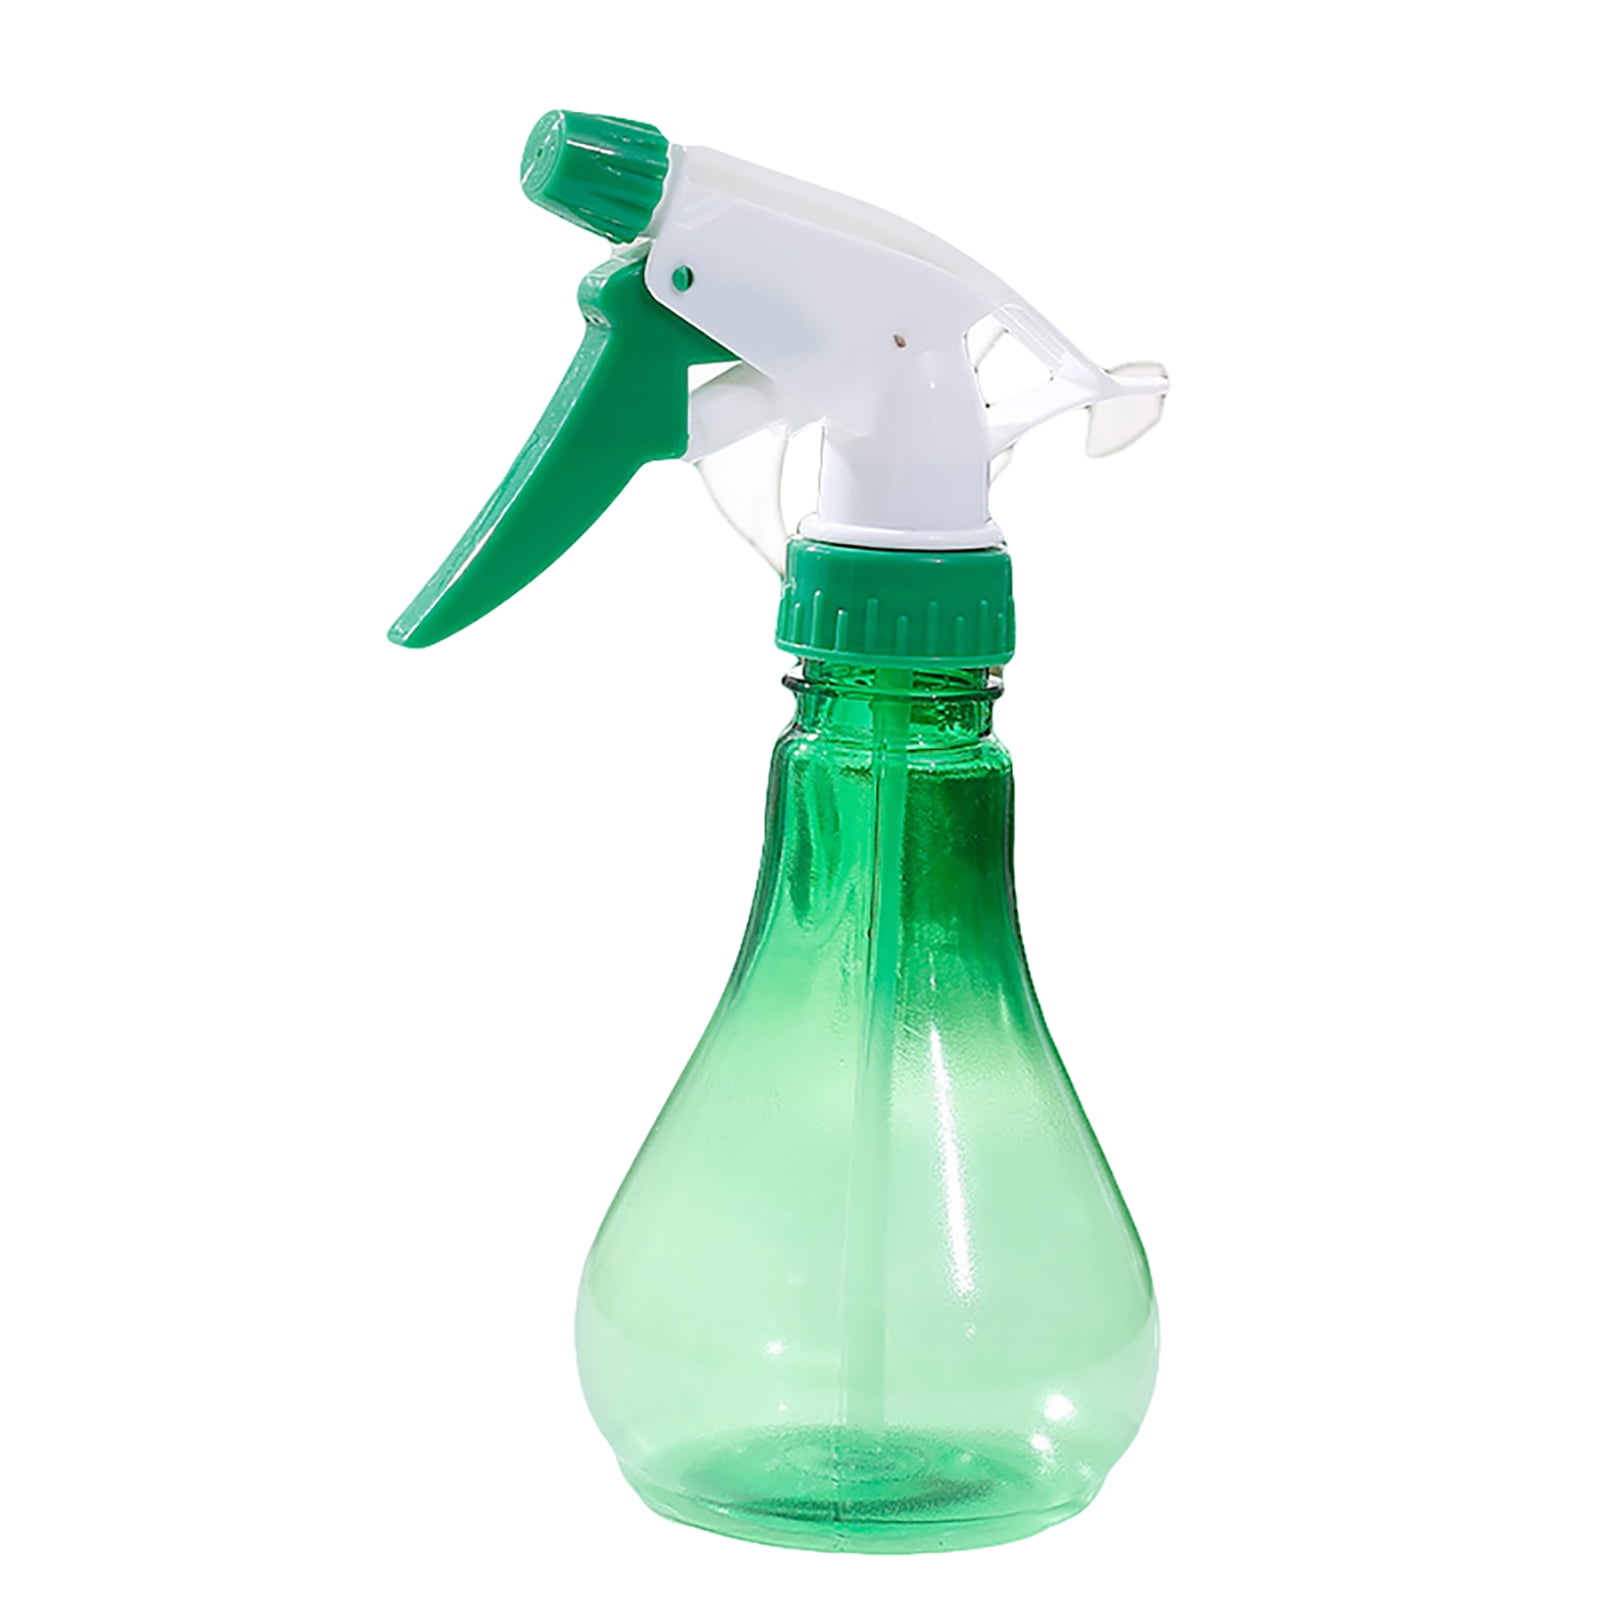 Spray Bottles For Cleaning Solutions Empty PP Spray Bottles For Hair Plants  And Cars Car Washing Foam Sprayer 0.53 Gal 2L - AliExpress